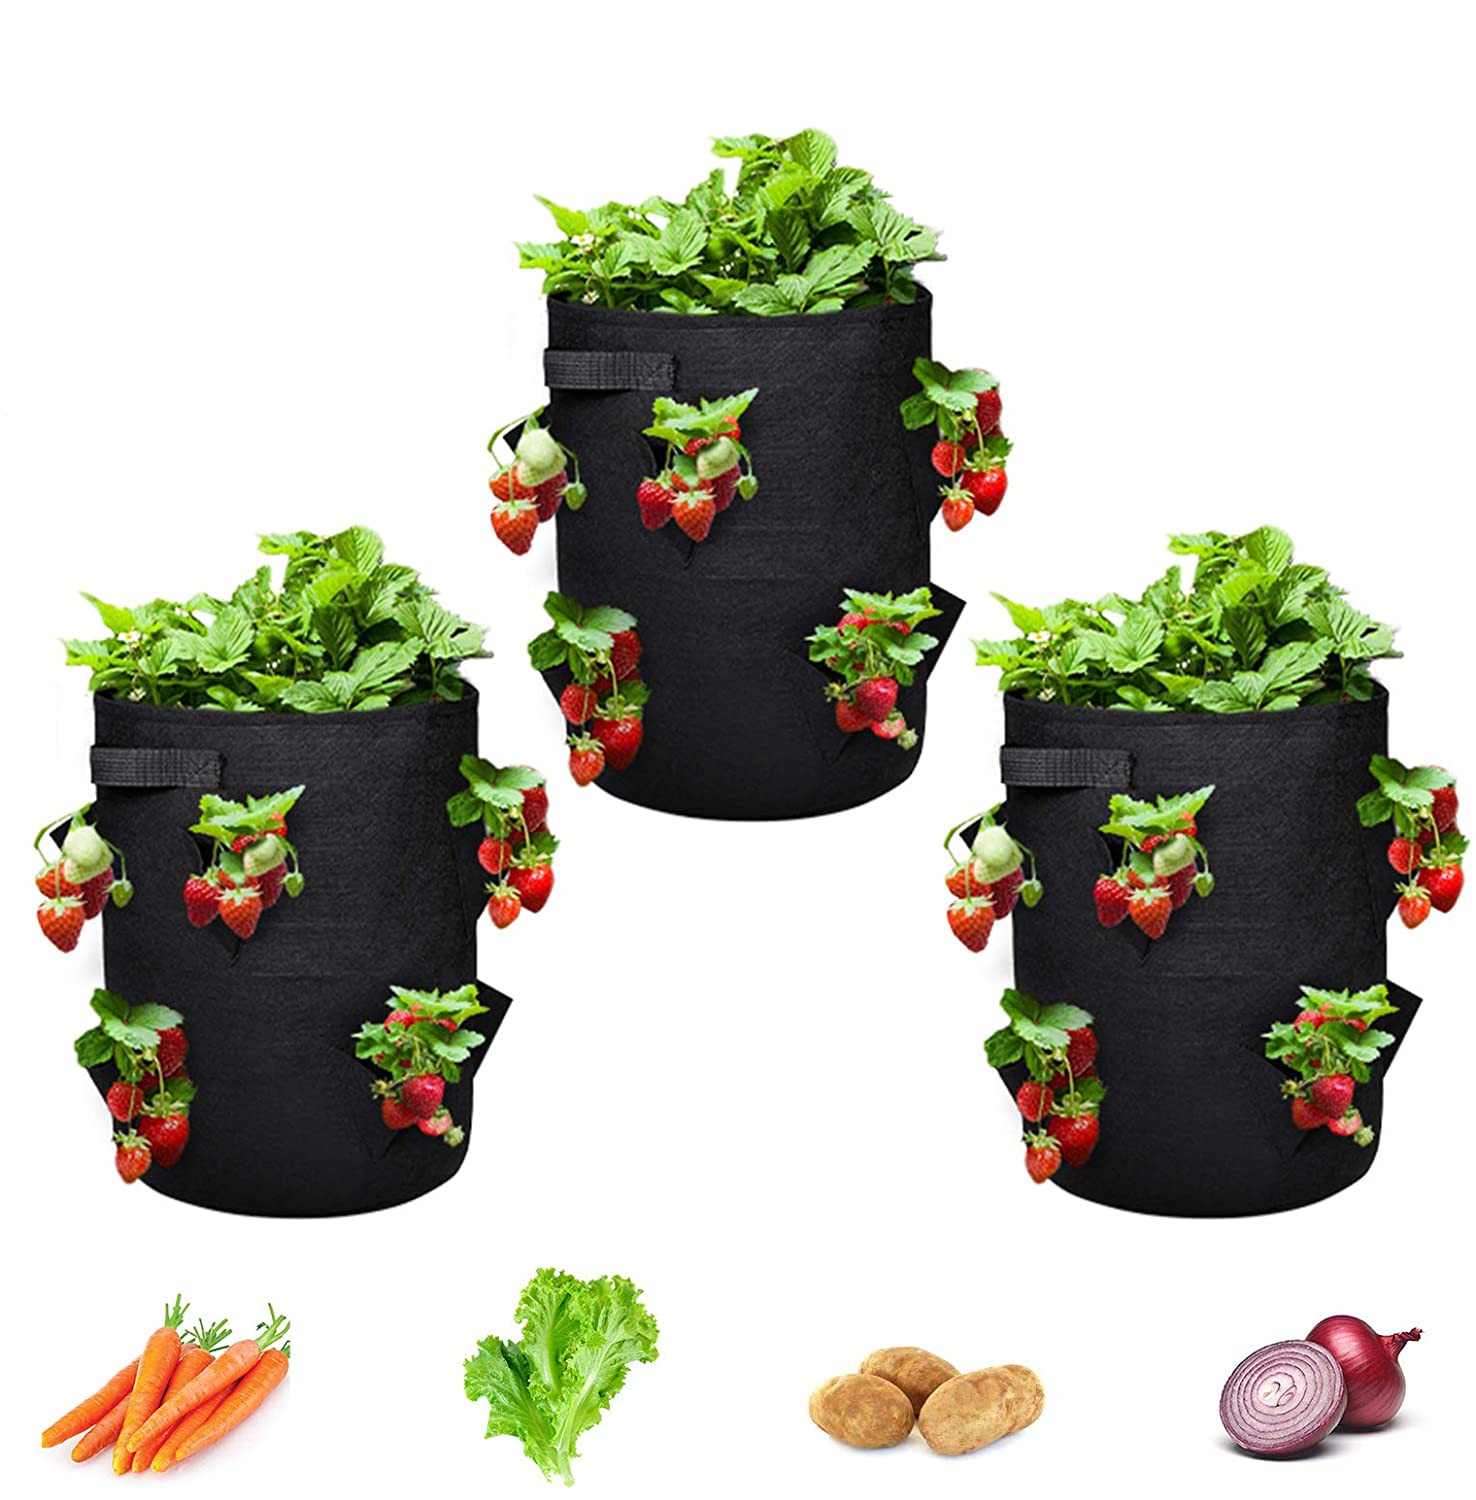 Strawberry Plant Grow Bag Planting Pouch Fabric Grow Pots Garden Planter Herb Grower Indoor Featured Image